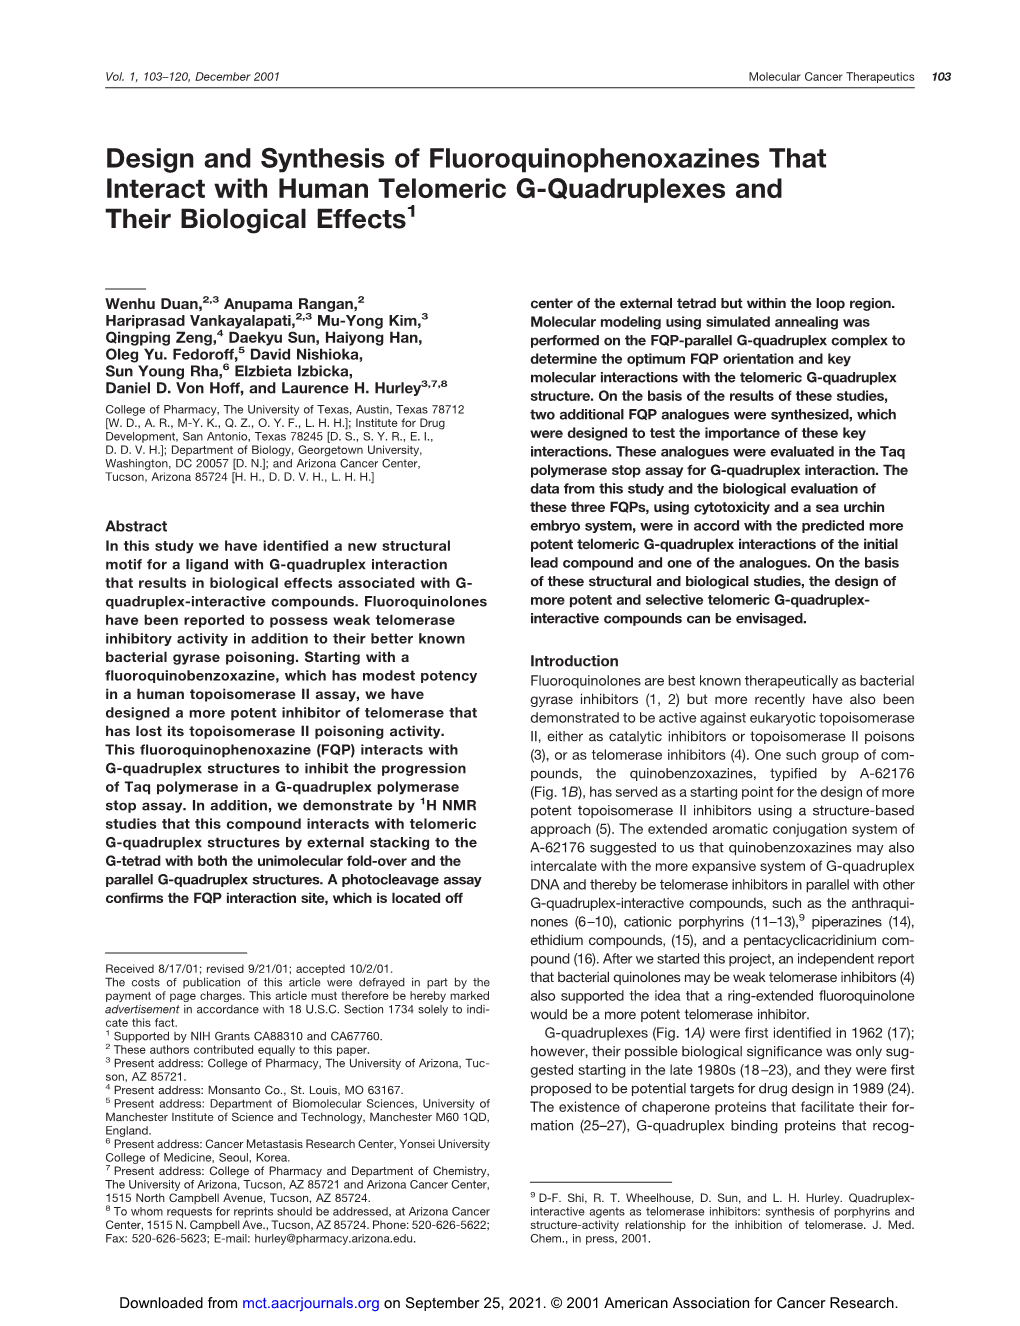 Design and Synthesis of Fluoroquinophenoxazines That Interact with Human Telomeric G-Quadruplexes and Their Biological Effects1